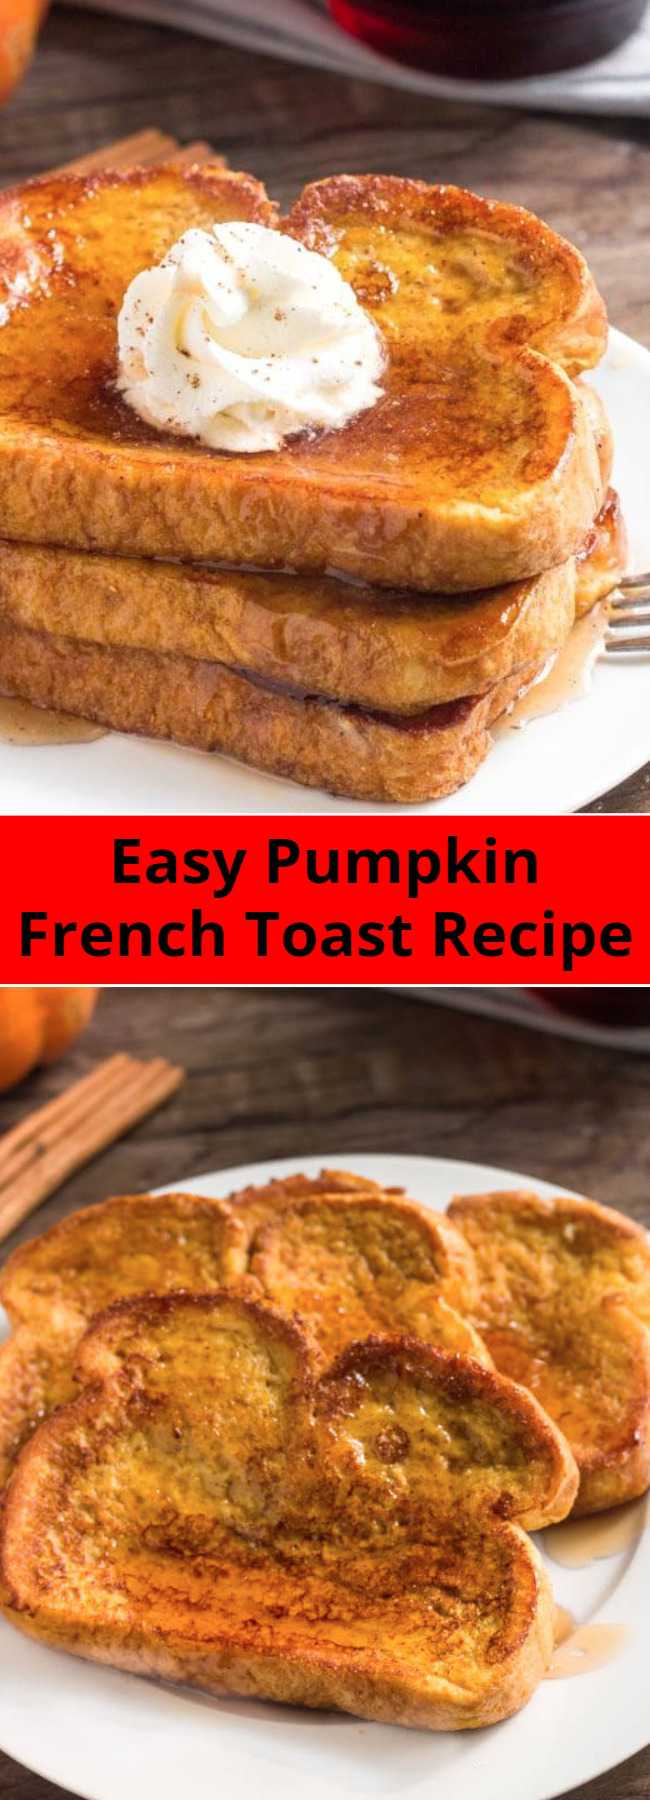 Easy Pumpkin French Toast Recipe - French toast that’s perfect easy, breakfast for fall! This Pumpkin French Toast is extra fluffy, filled with pumpkin spice & tastes amazing drizzled in maple syrup. #fall #pumpkin #pumpkinspice #frenchtoast